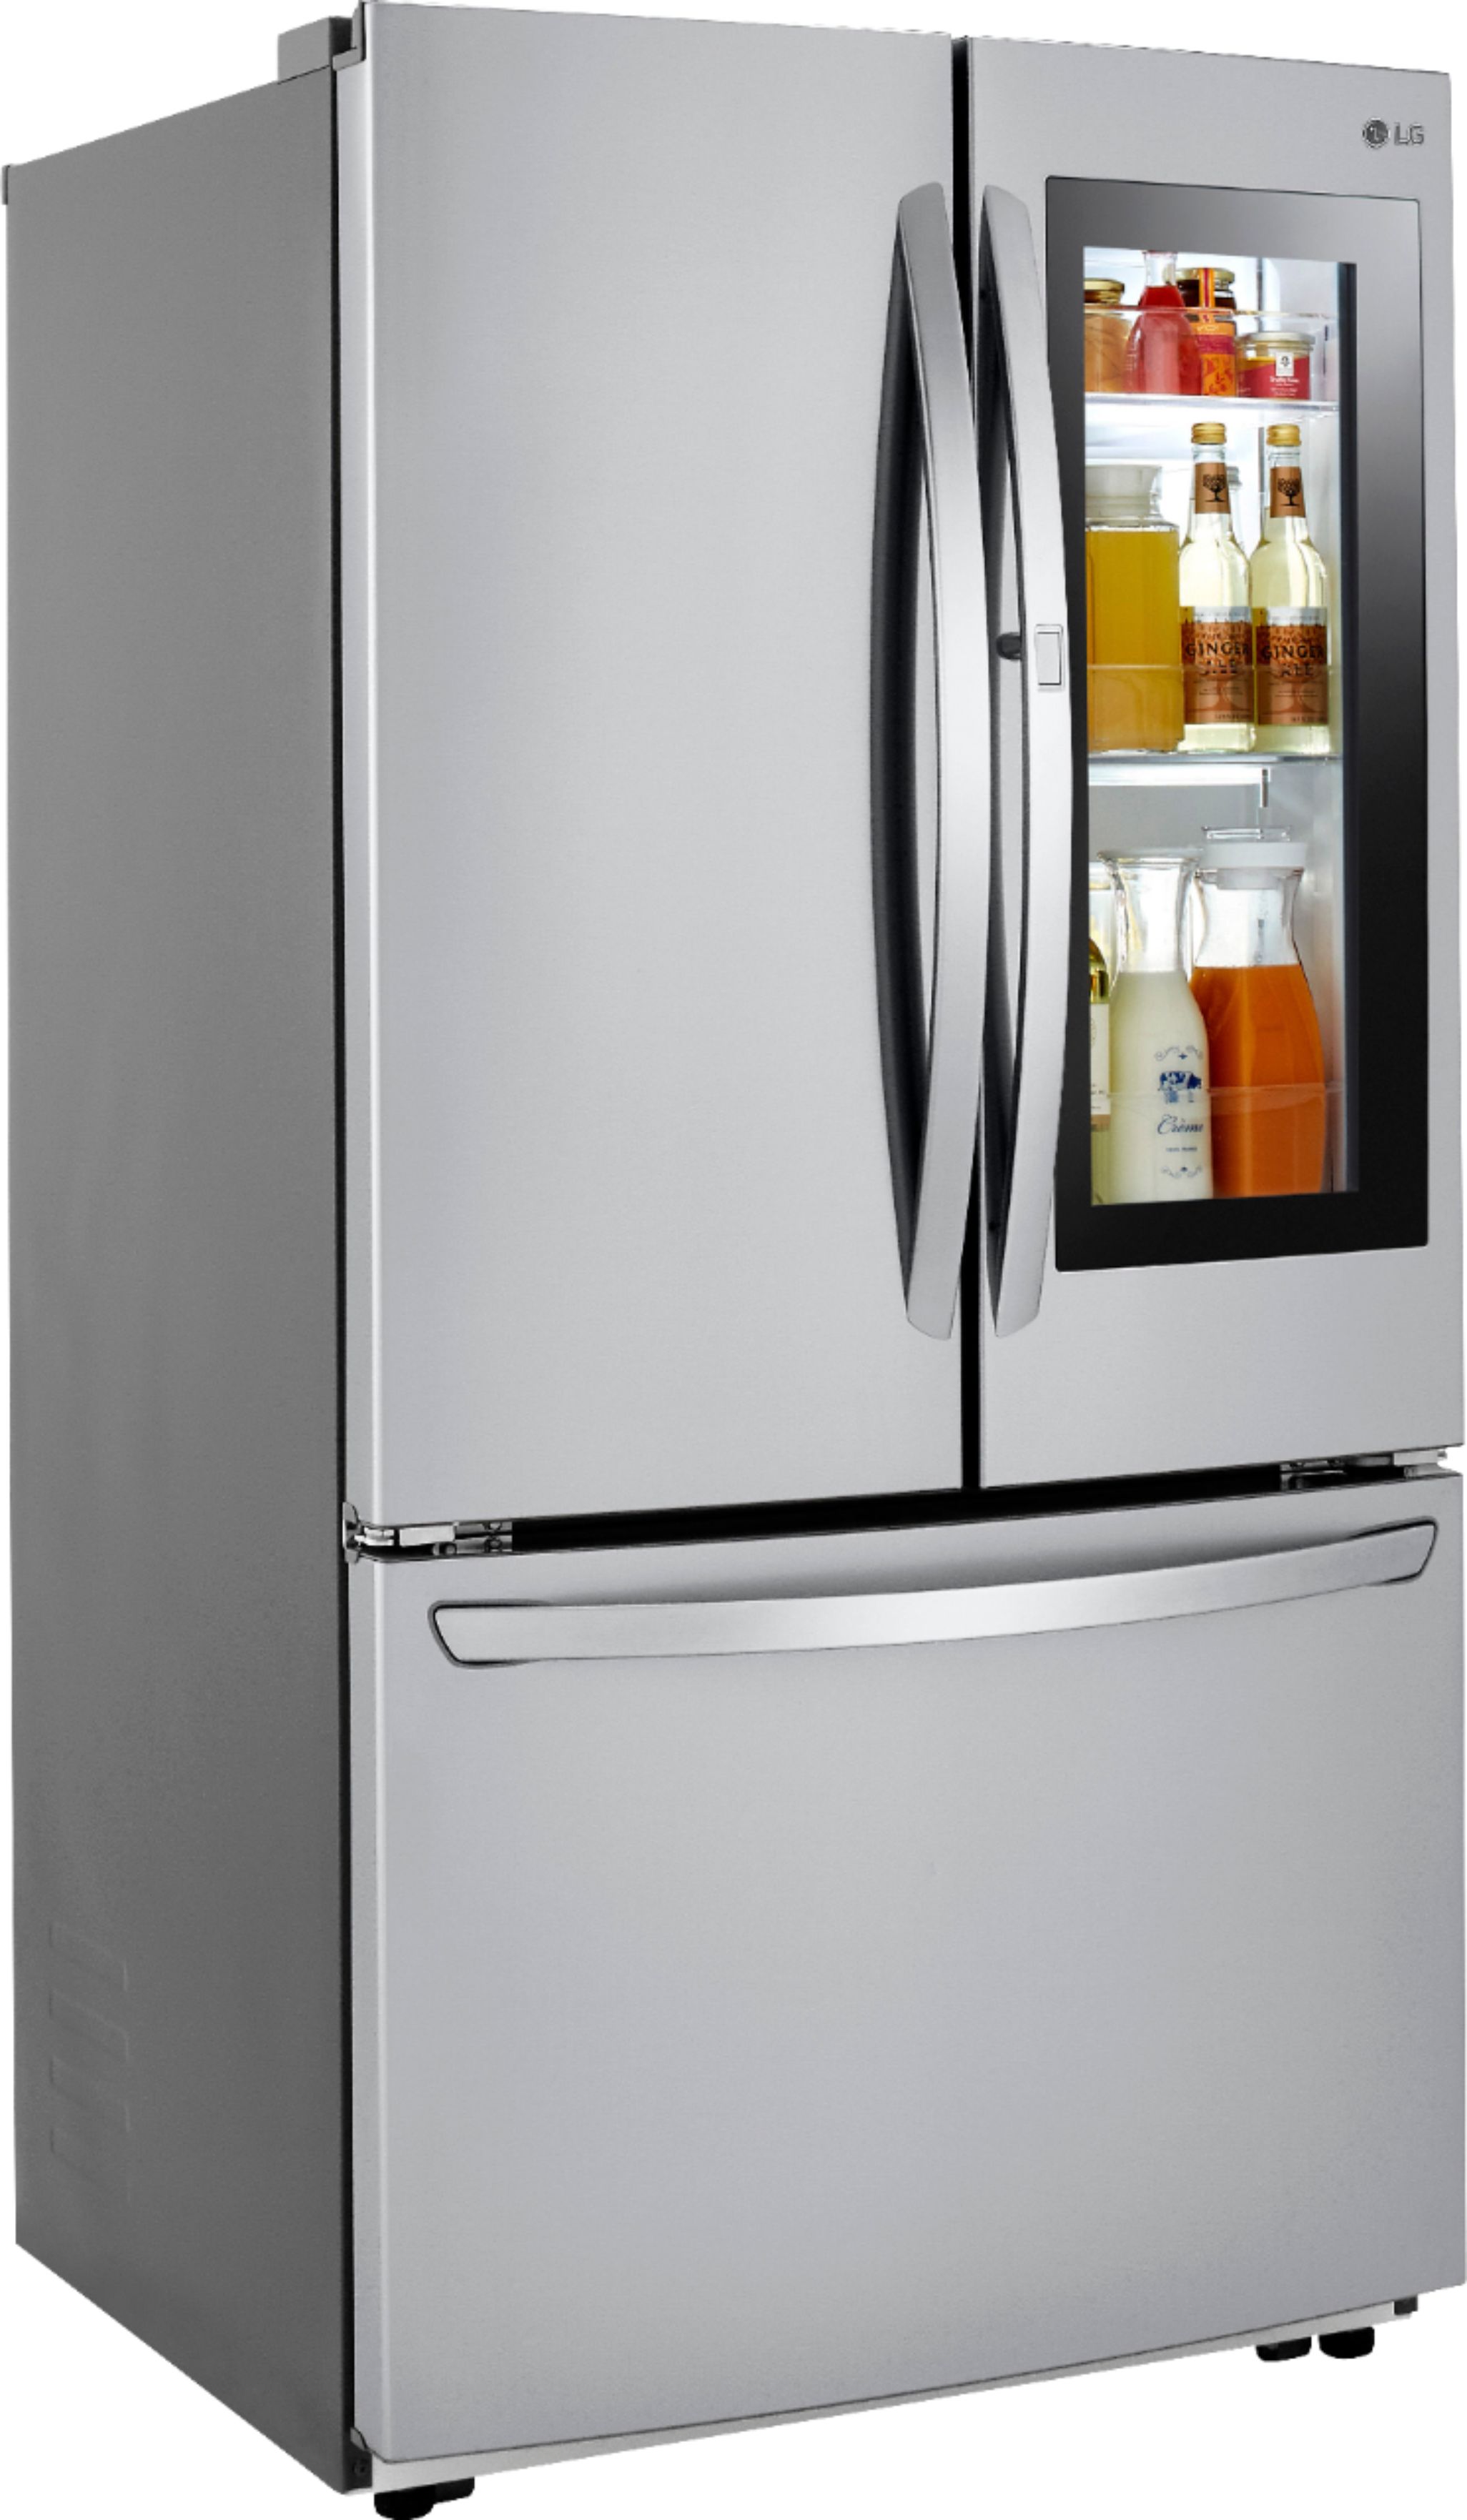 Angle View: LG - 22.6 Cu. Ft. French InstaView Door-in-Door Counter-Depth Refrigerator with Ice Maker - Stainless steel